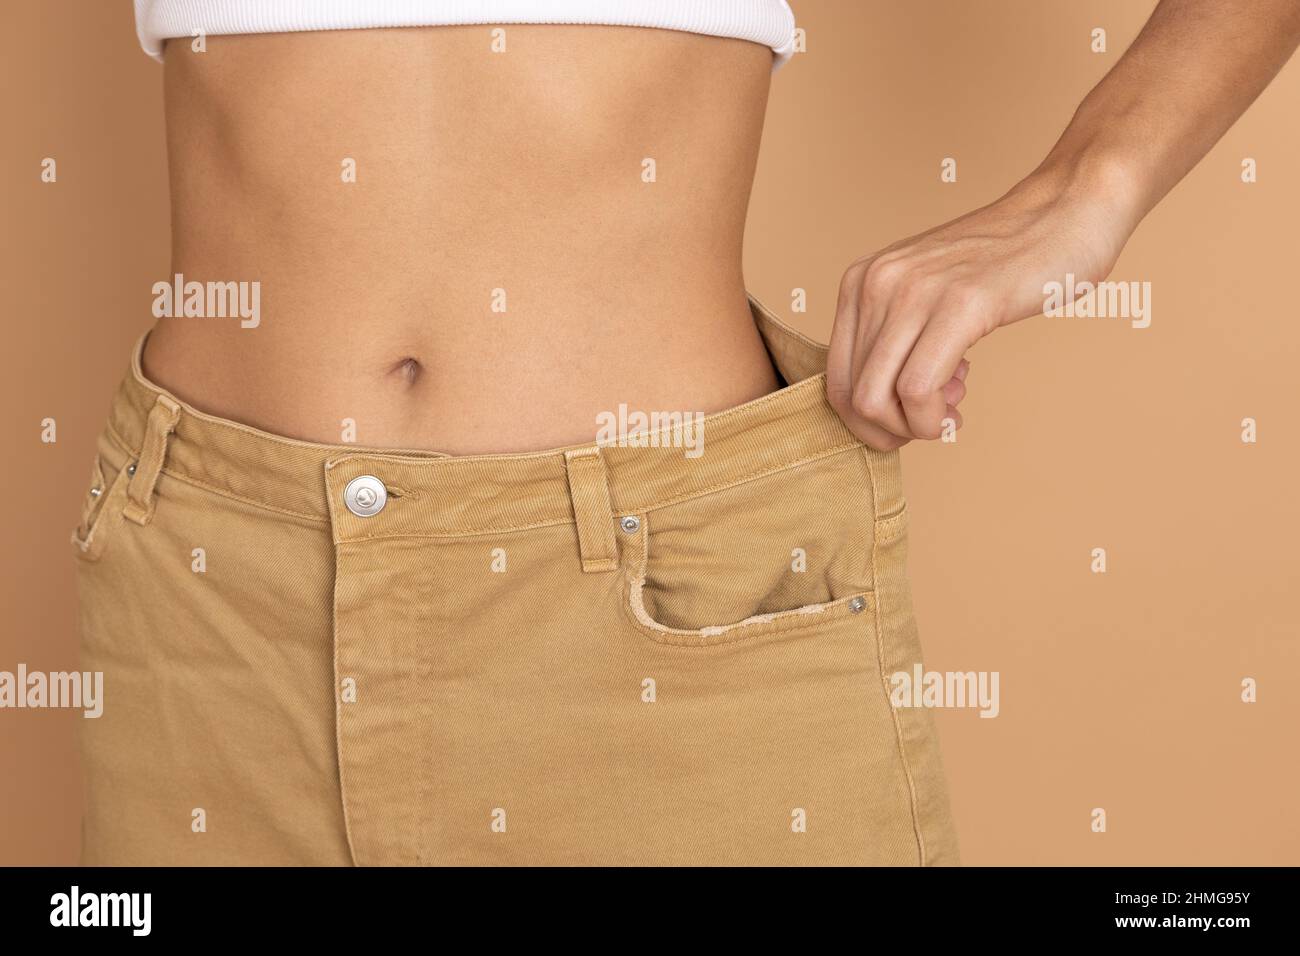 Woman with thin waist wearing big cream colored jeans on background of flesh color. Healthy eating and body building. Loosing weight by keeping diet Stock Photo